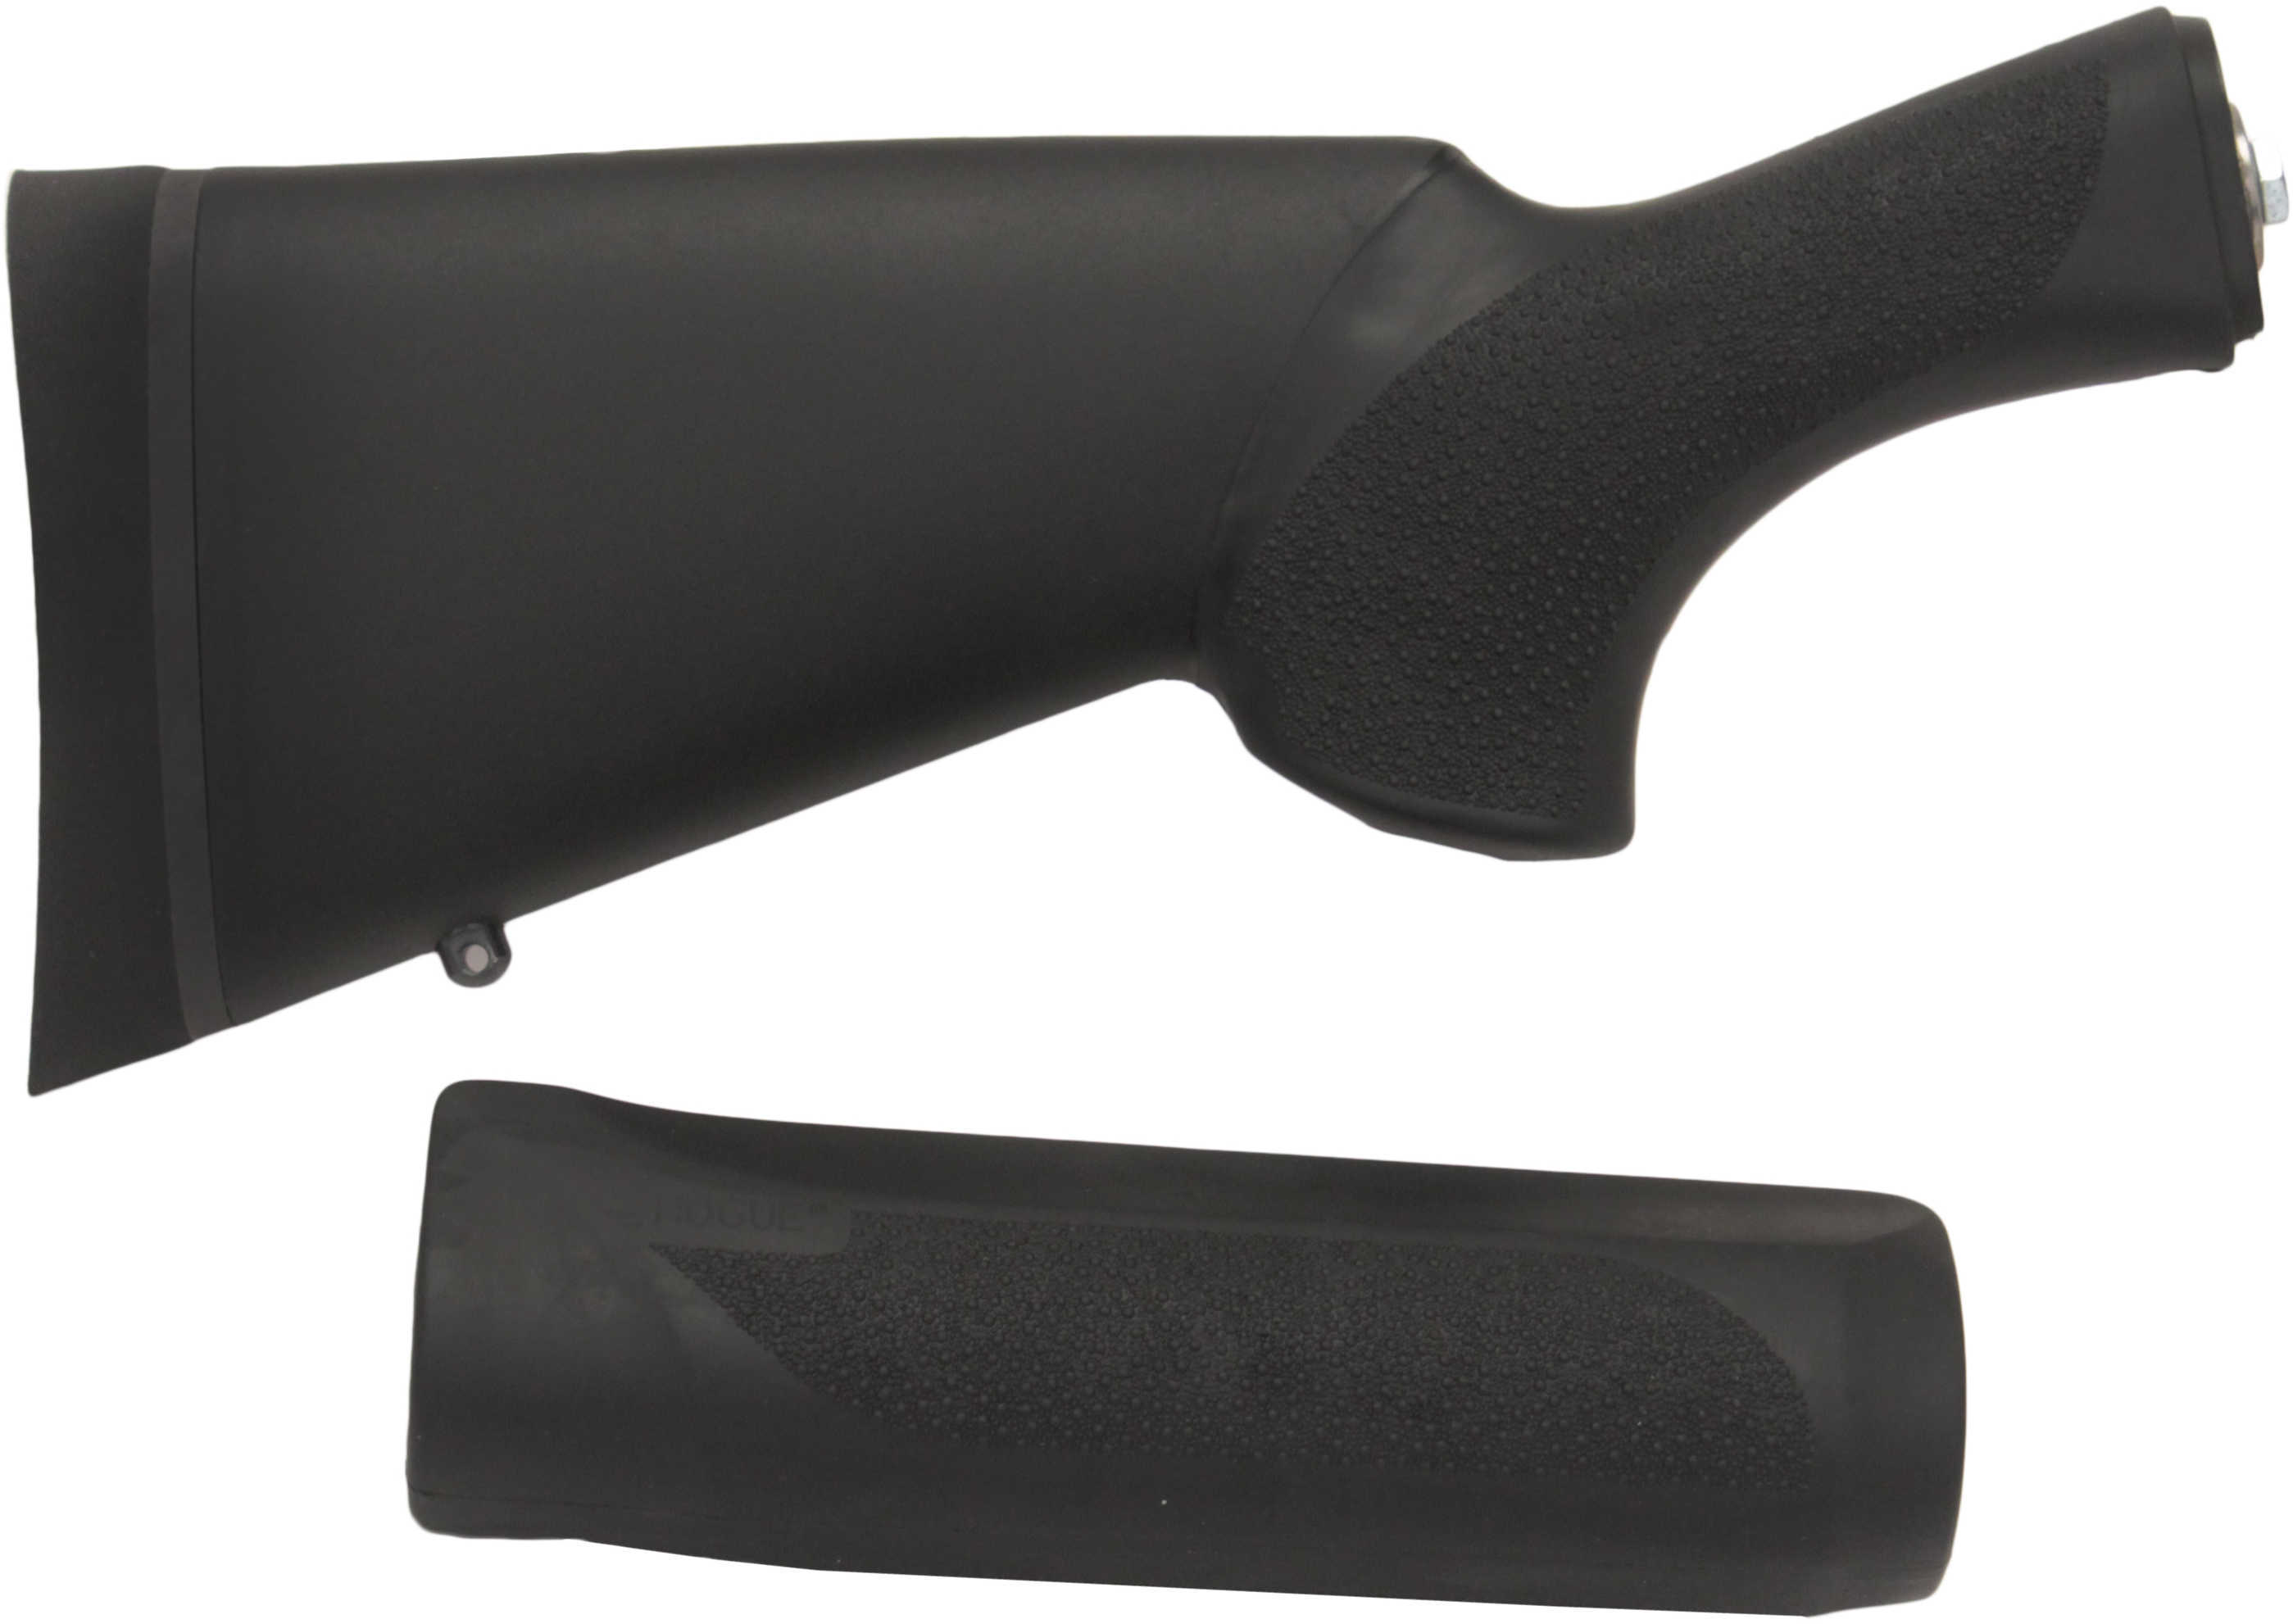 Hogue 08732 OverMolded Combo Kit Shotgun Stock & Forend with 12" LOP Remington 870 Rubber Black